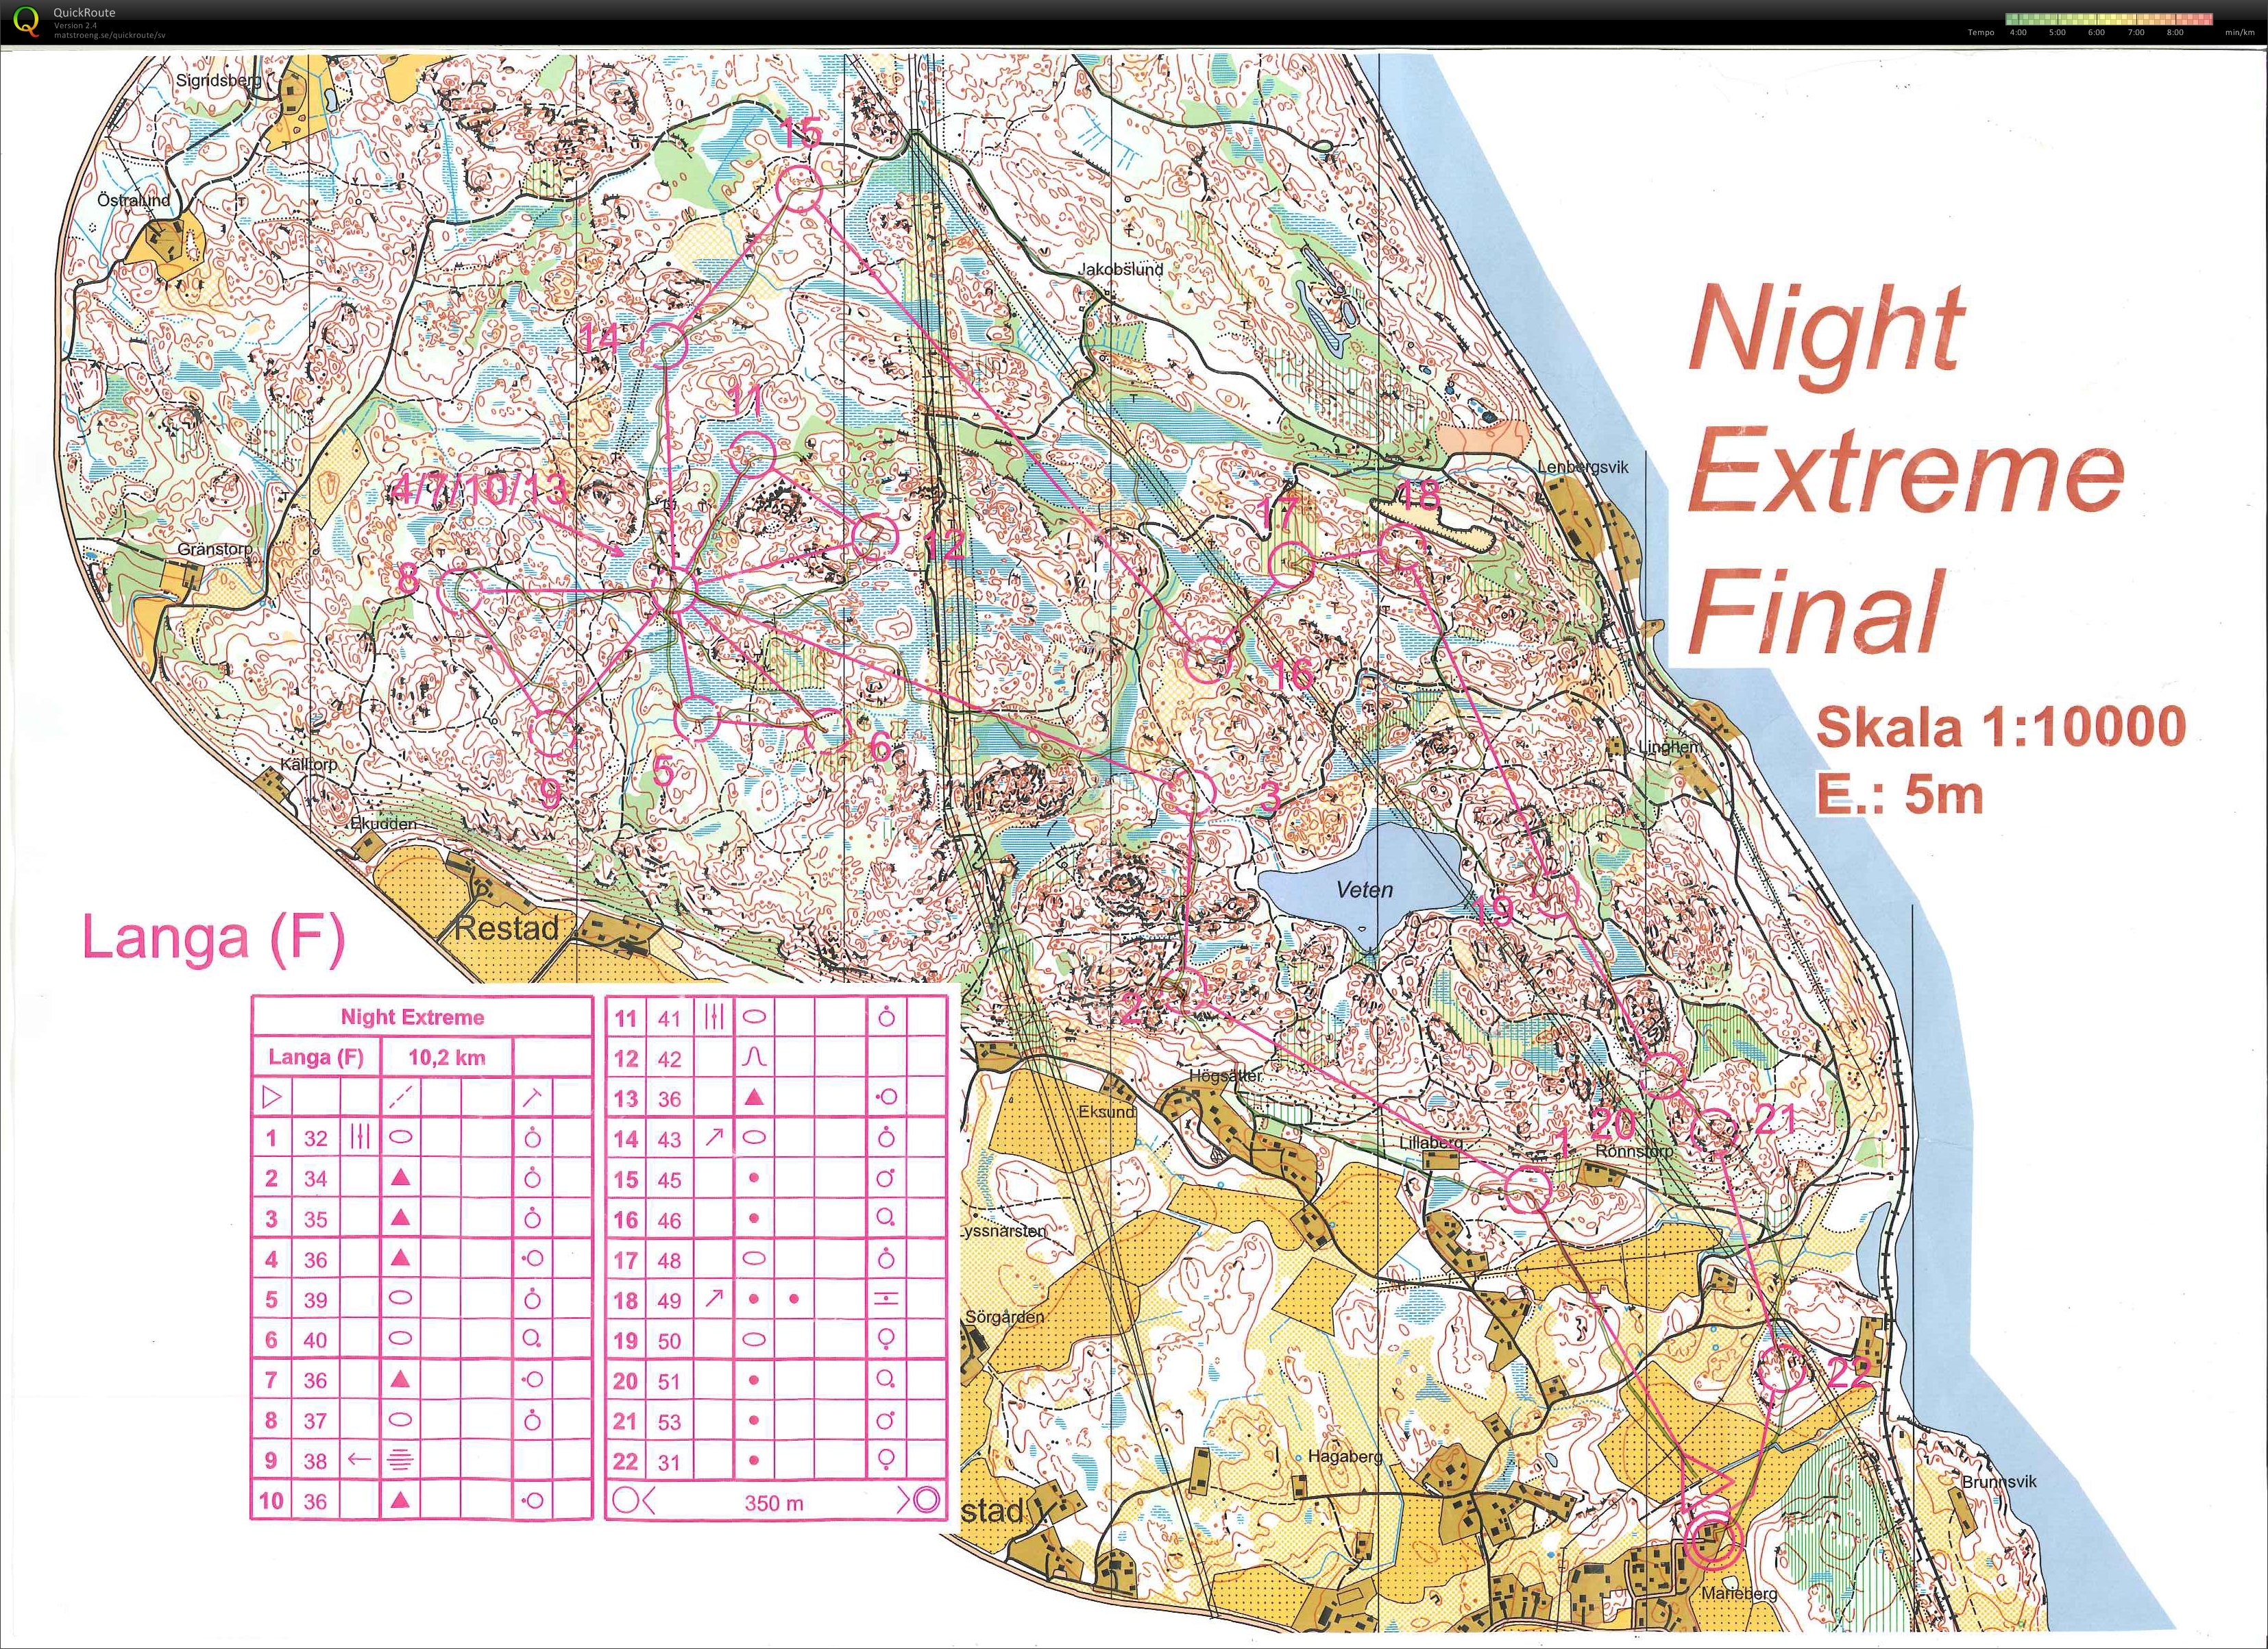 Night Extreme Final (2012-03-13)